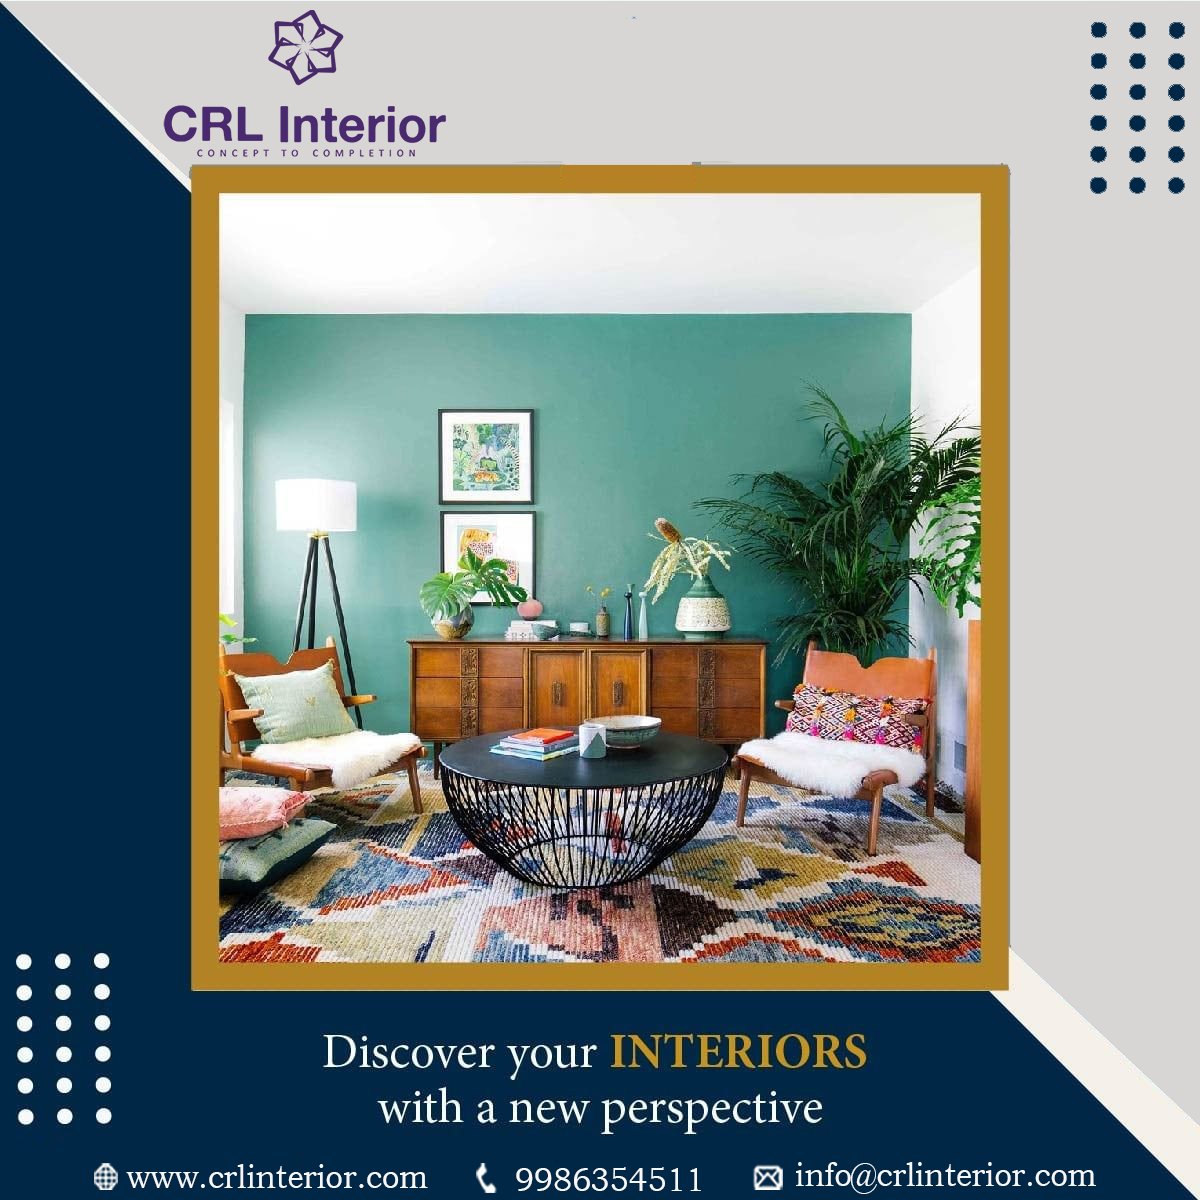 Discover your interiors with a new Perspective

Visit : crlinterior.com

#interiordesigner #residentialinteriordesign #homedecor #homeinteriors #crlinterior #concepttocompletion